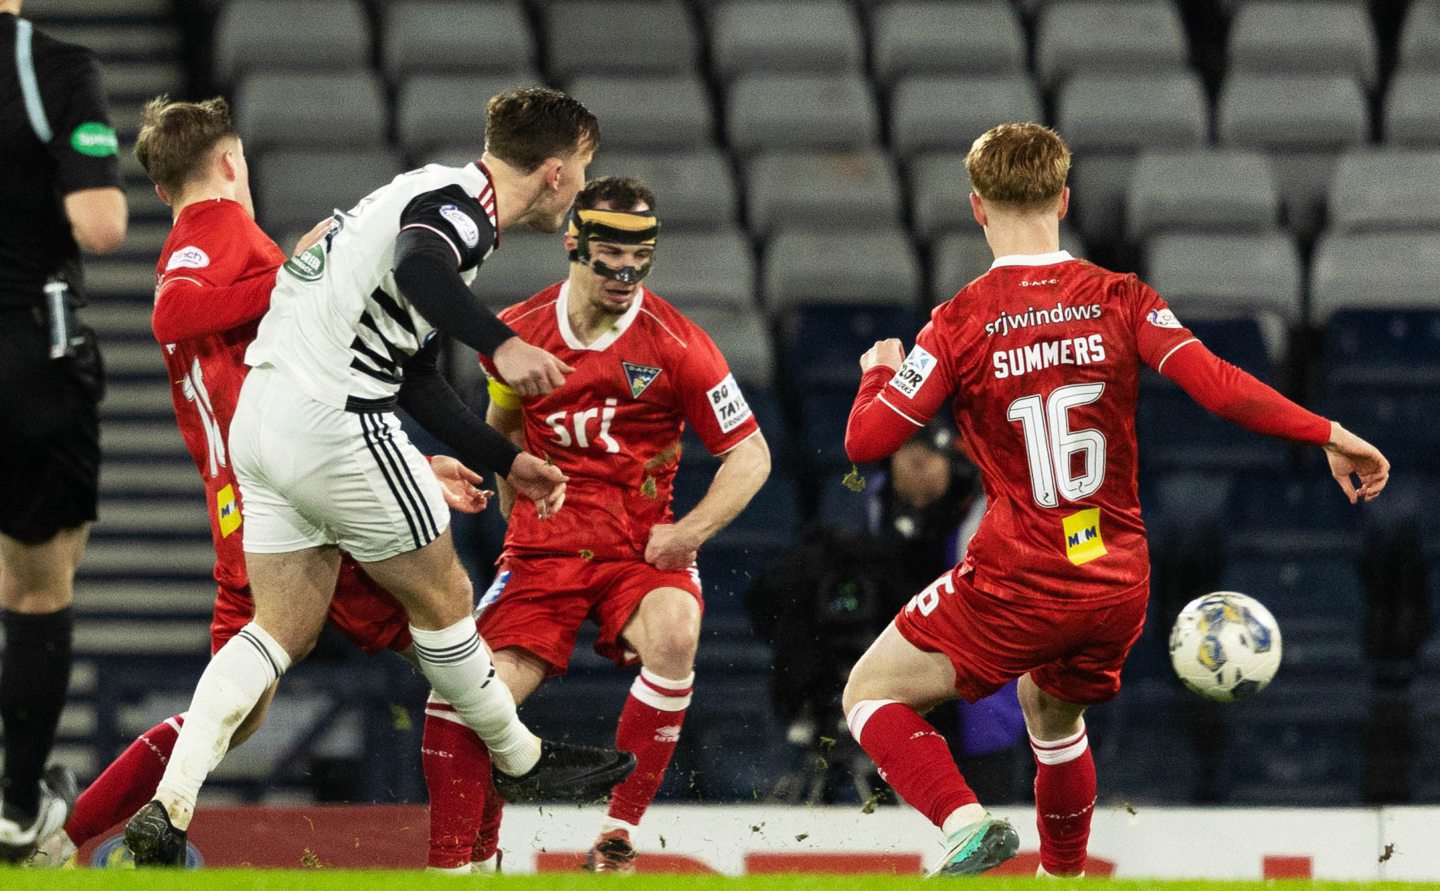 Dunfermline lost 2-1 away to Queen's Park on Friday. Image: SNS.